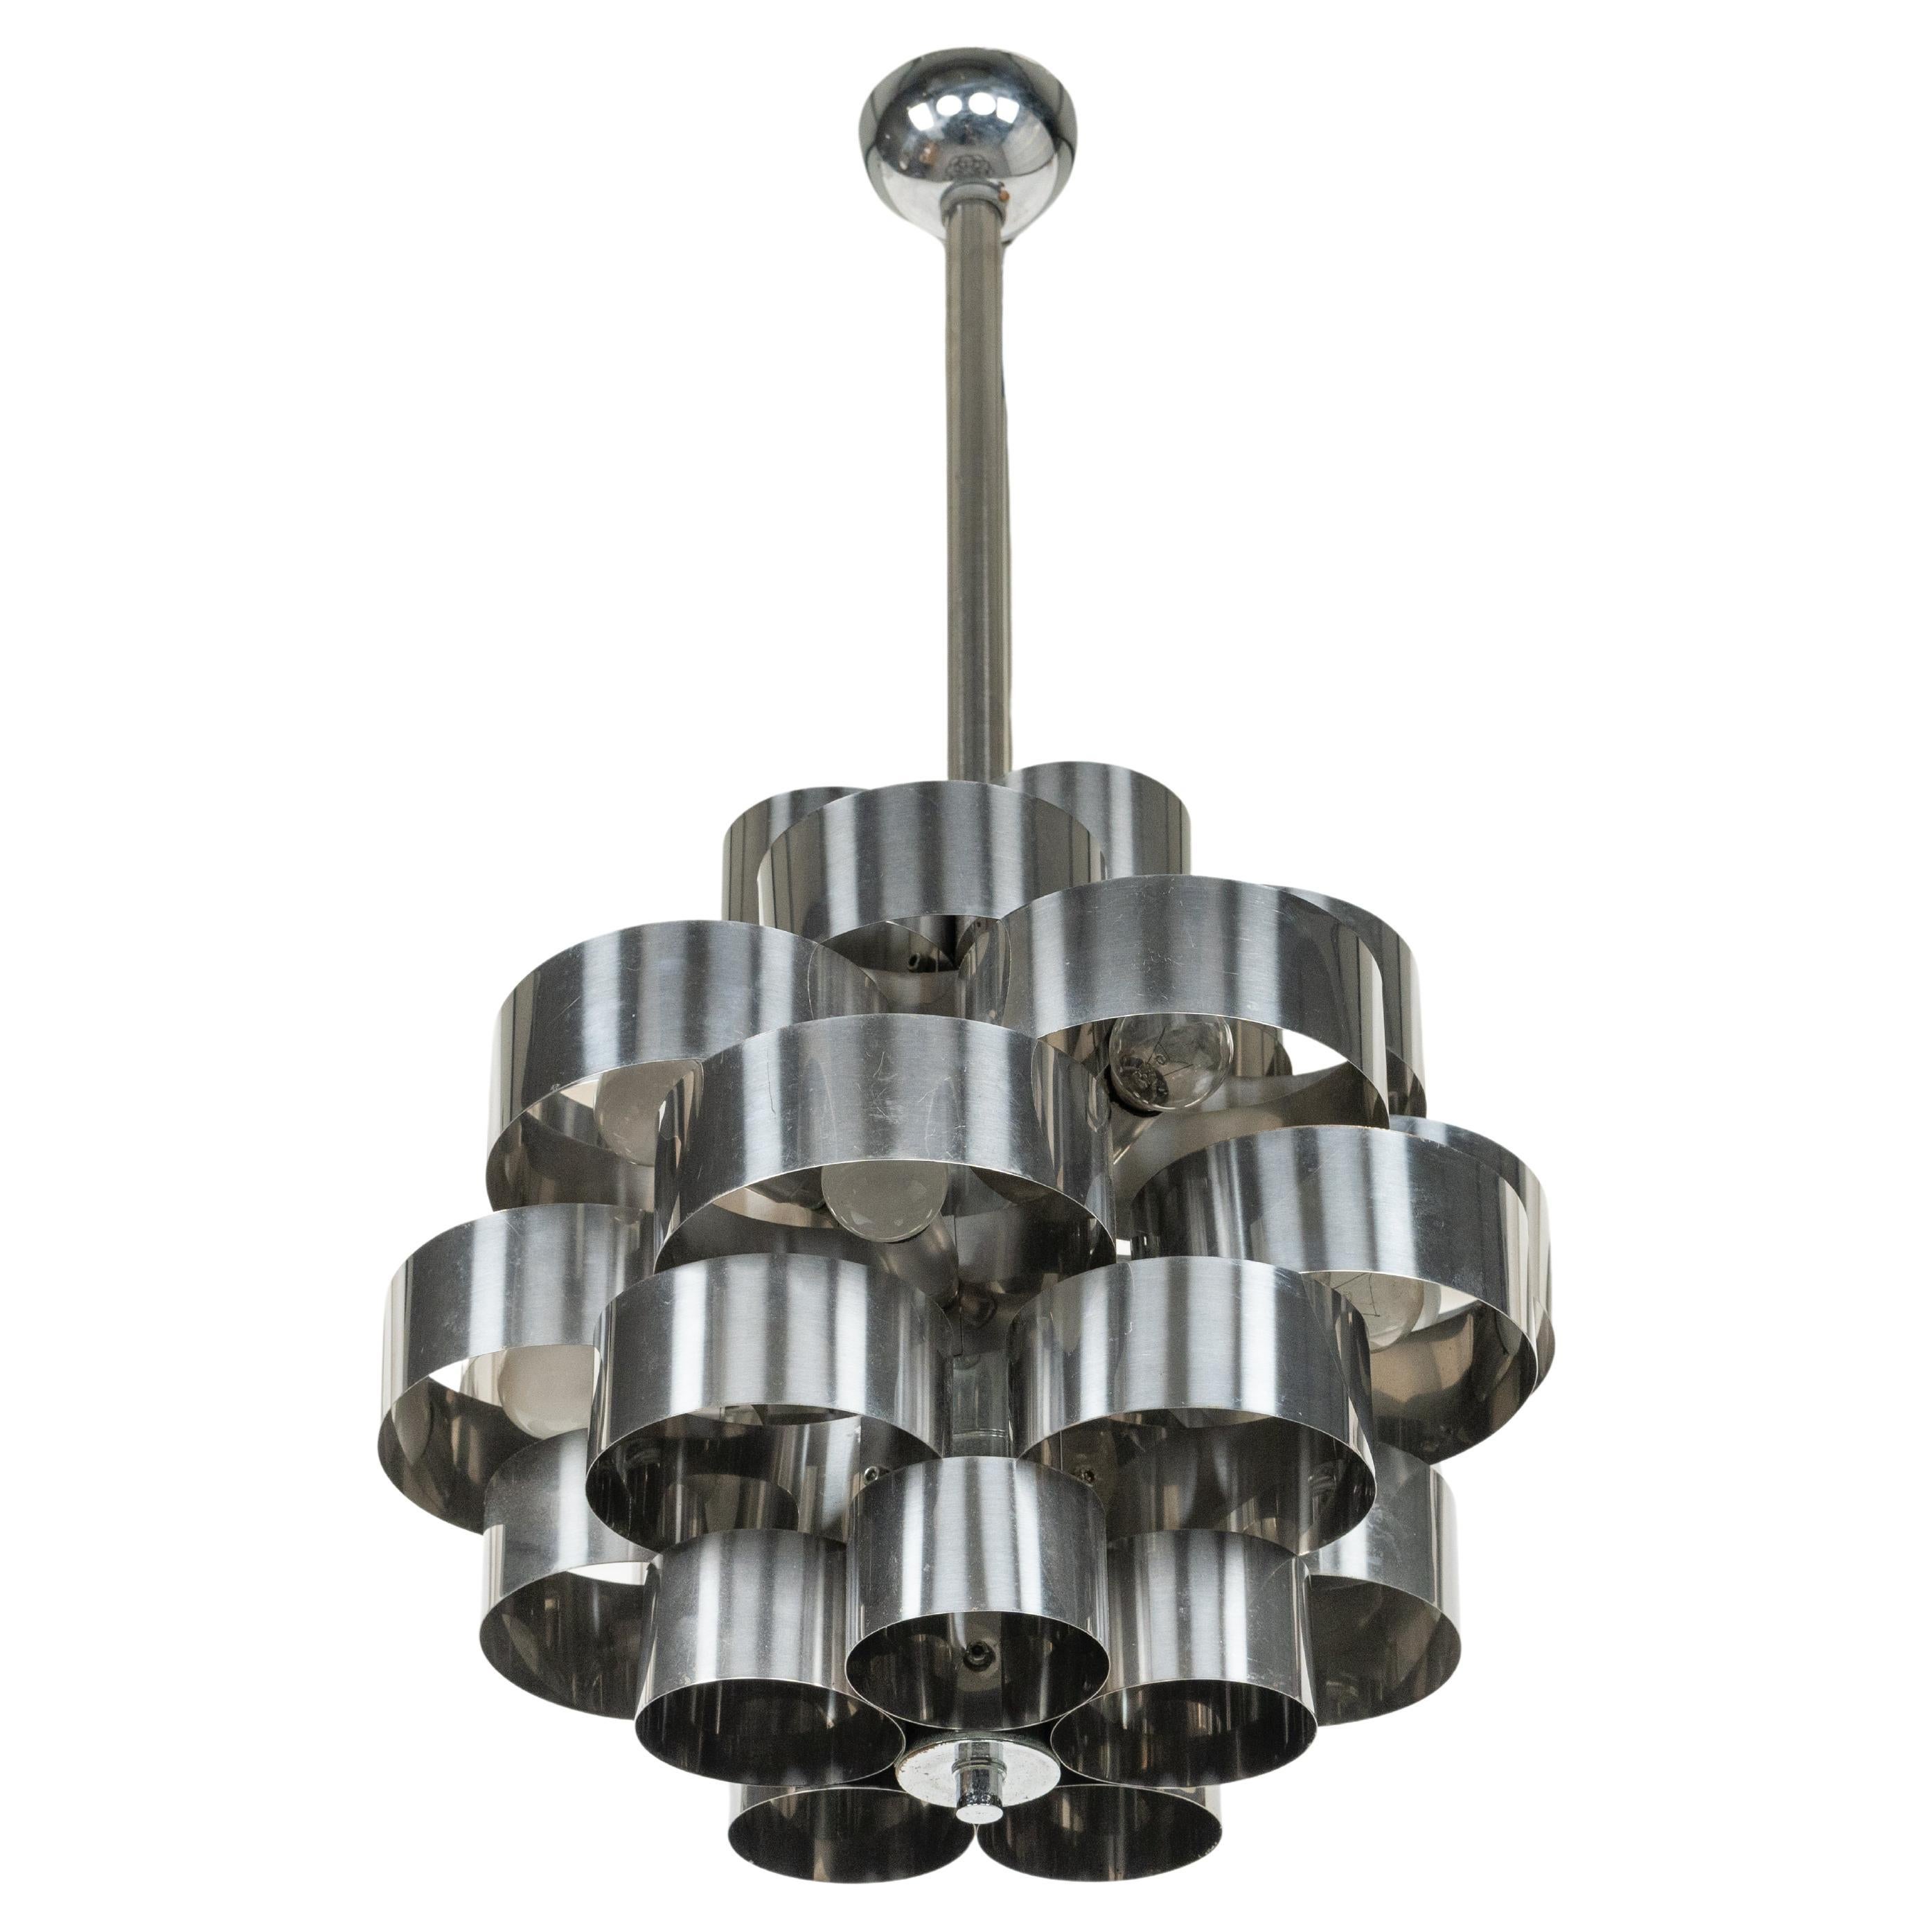 Space Age Midcentury Chandelier Aluminum and Steel by Max Sauze for Sciolari, Italy 1970s For Sale